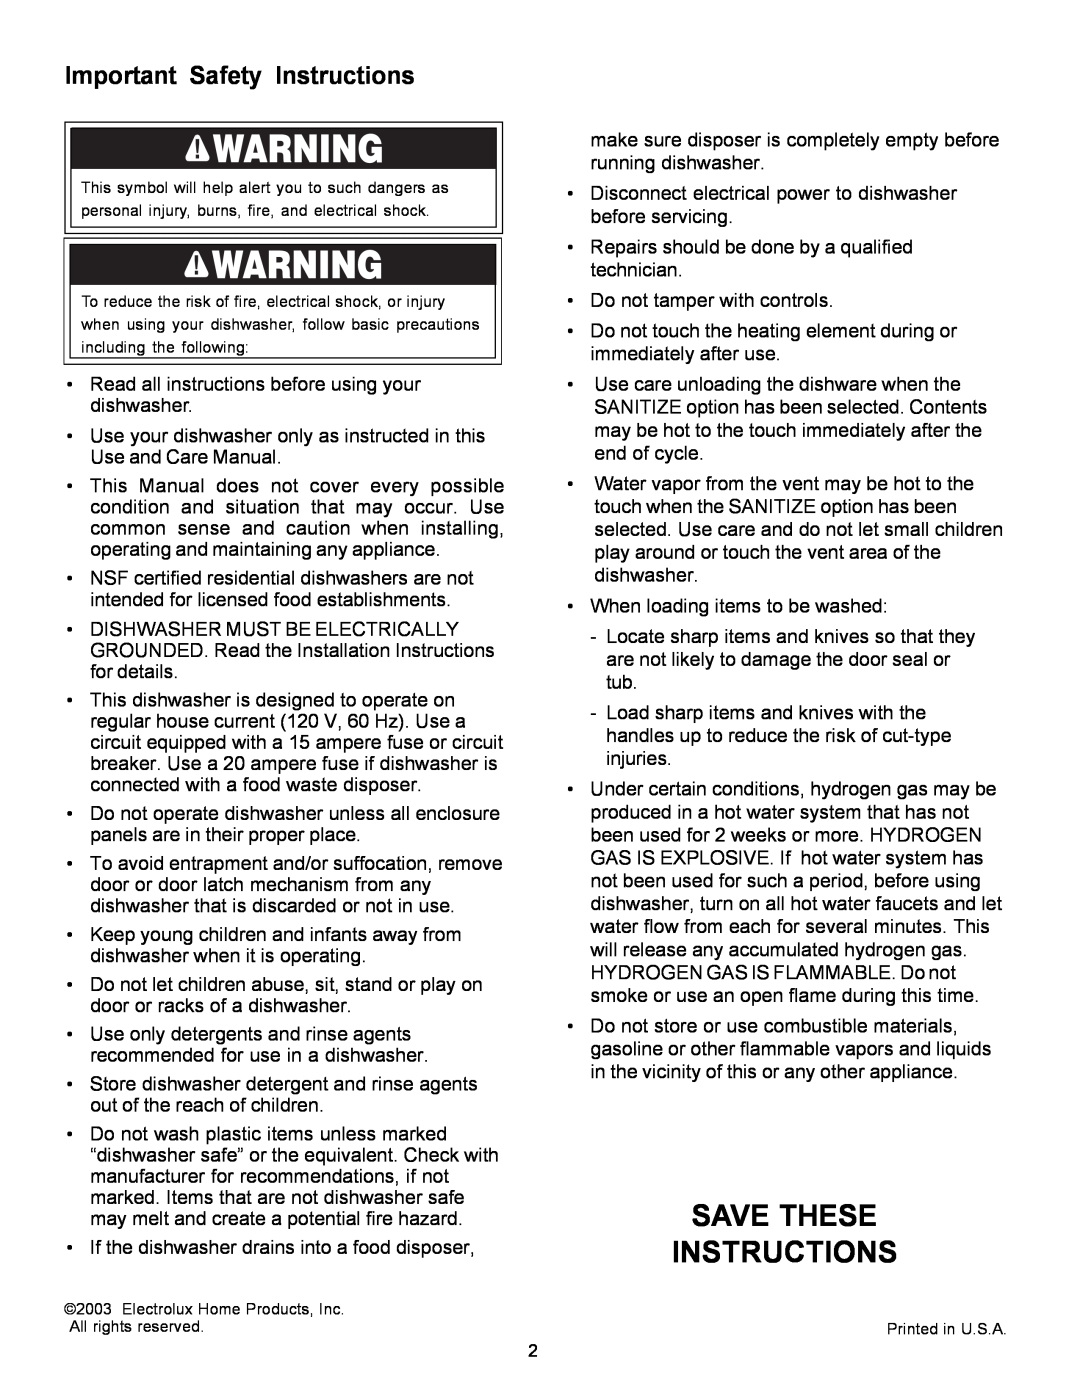 Frigidaire 1500 Series warranty Important Safety Instructions, Save These Instructions 